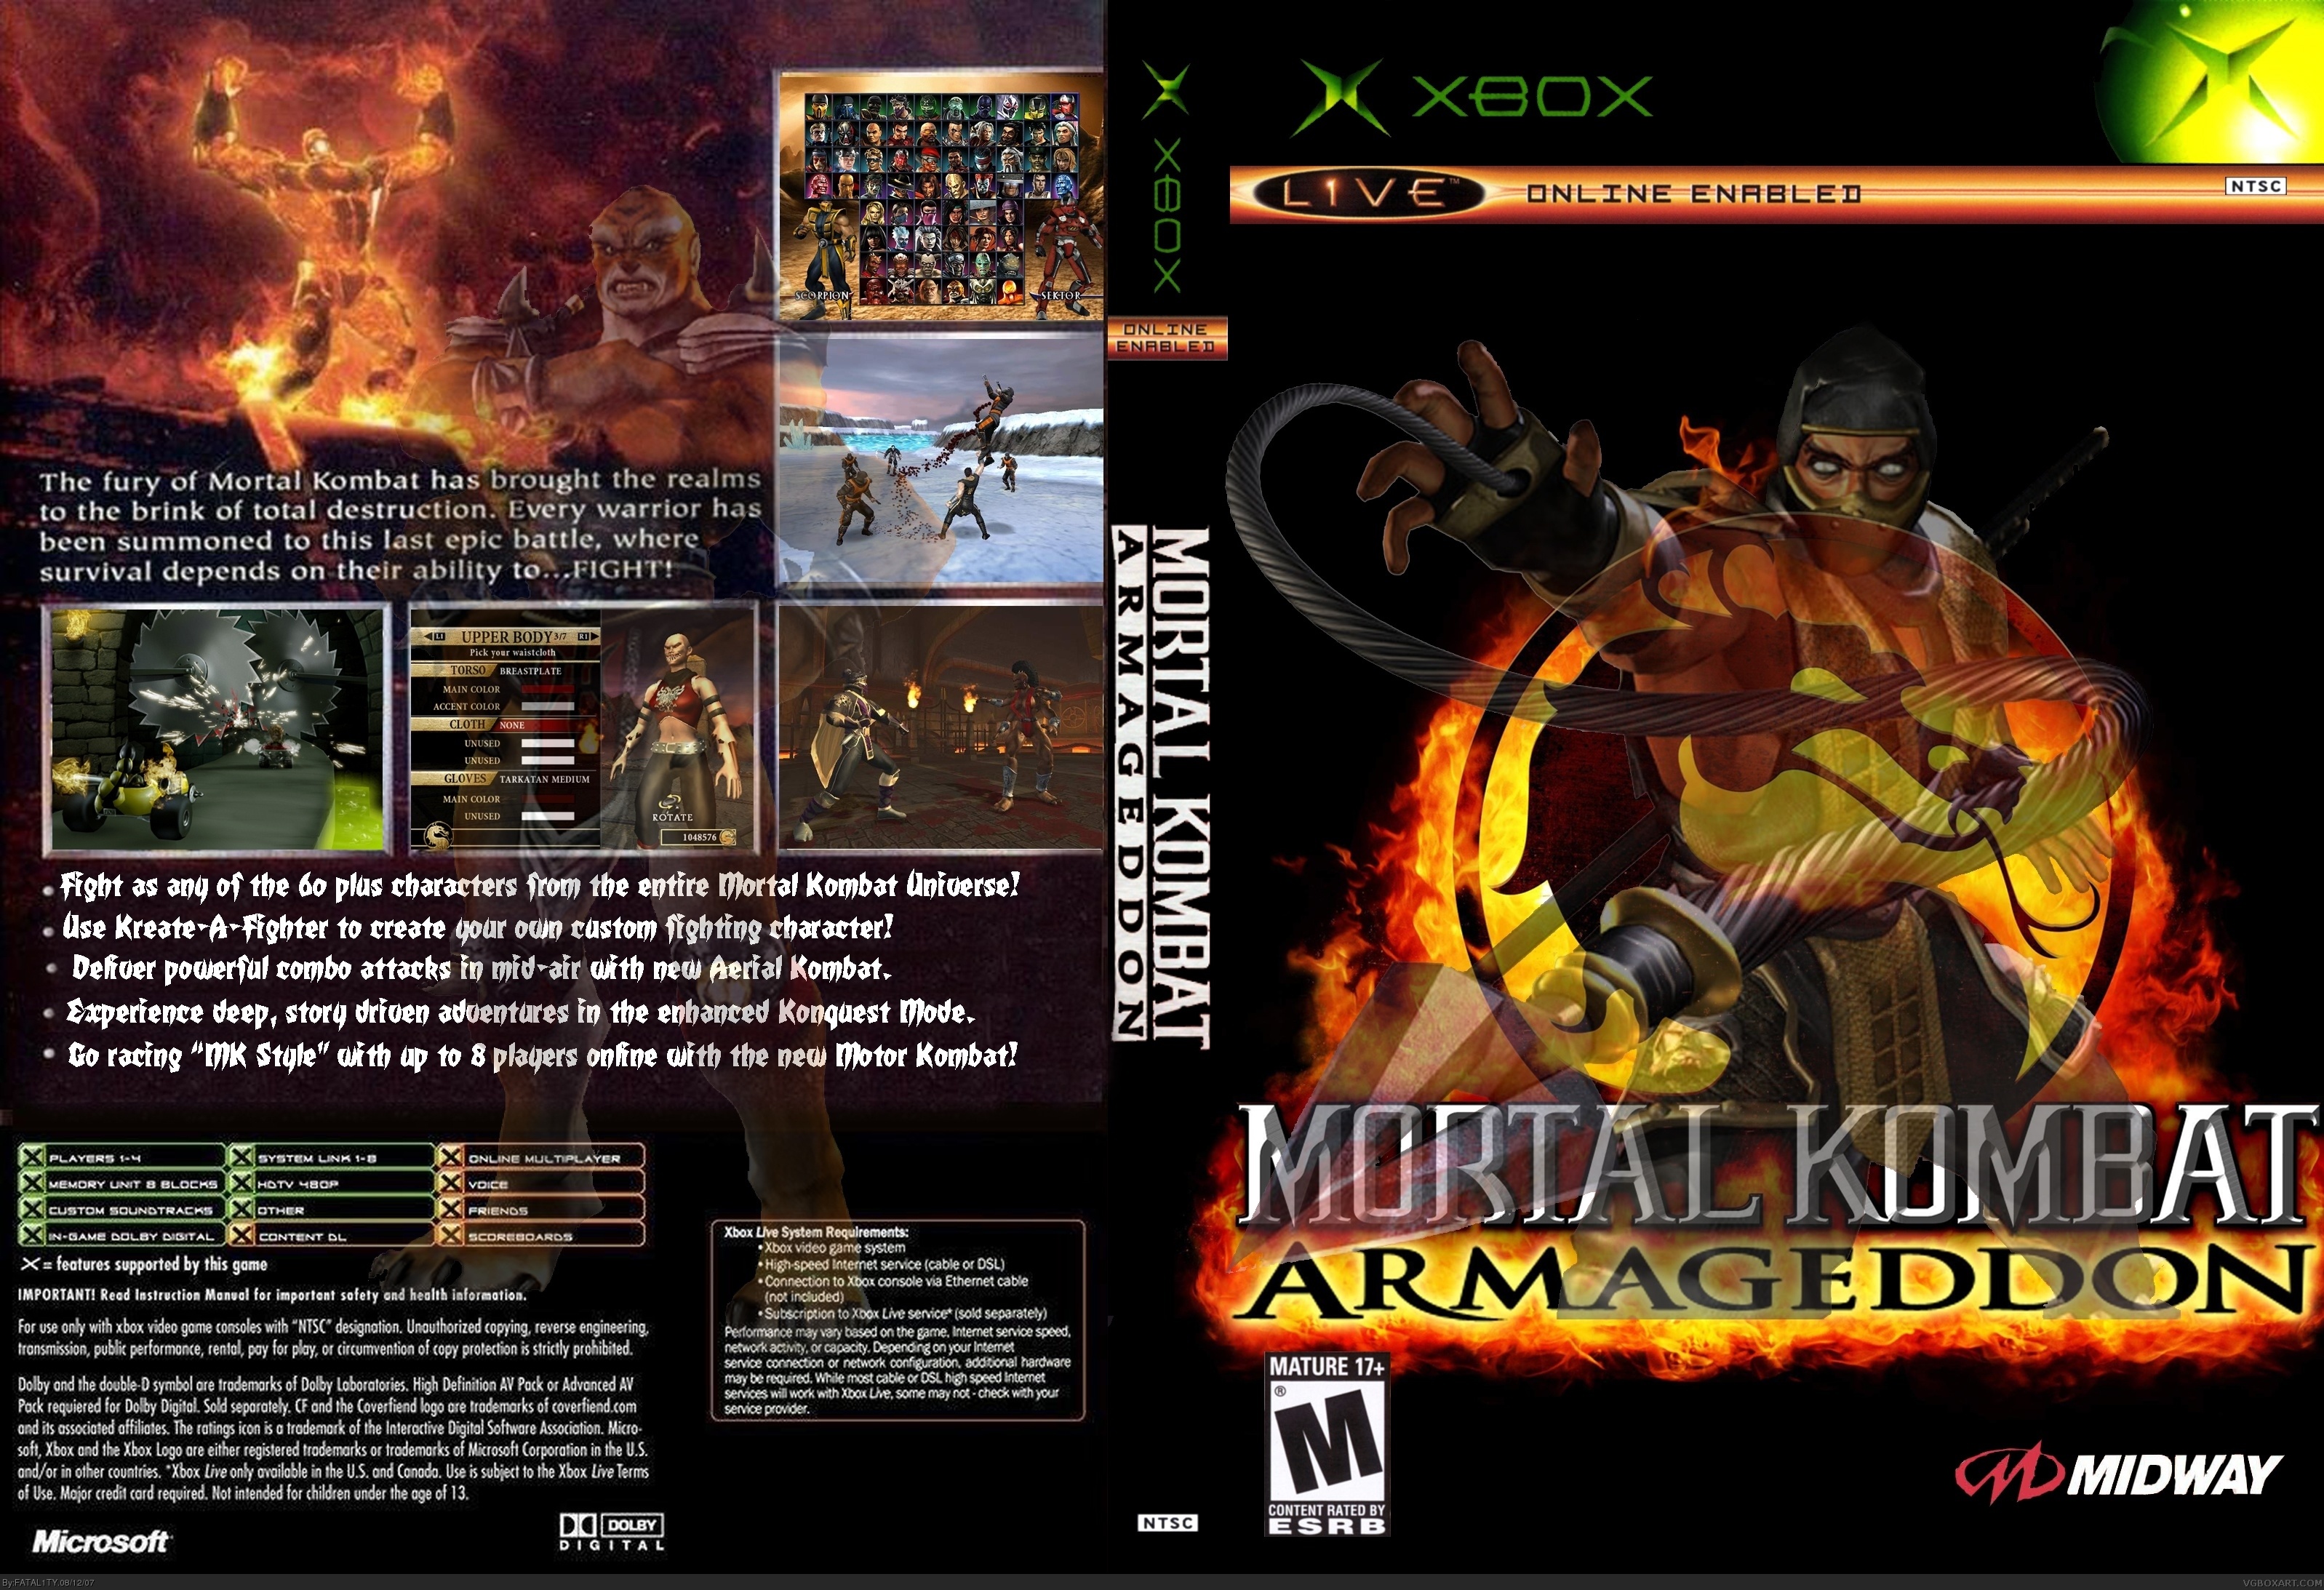 Mortal Kombat: Armageddon Xbox 360 Cover by RuthlessGuide1468 on DeviantArt